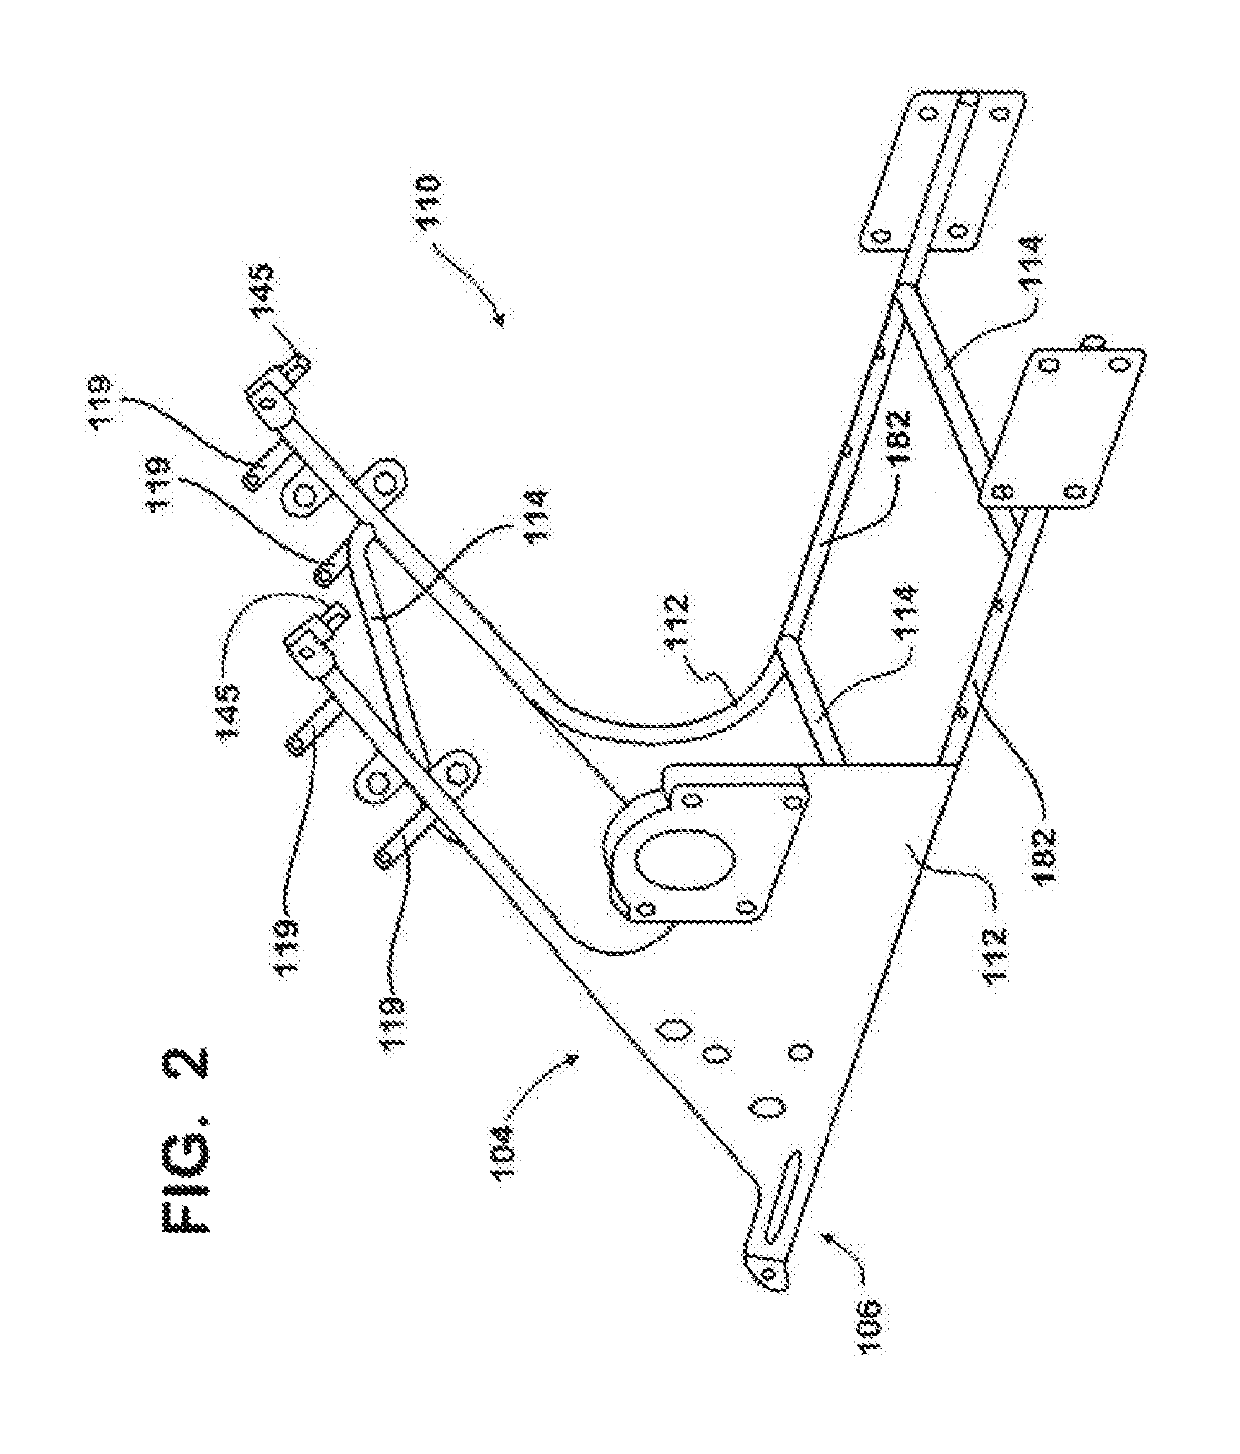 Grout installation apparatus